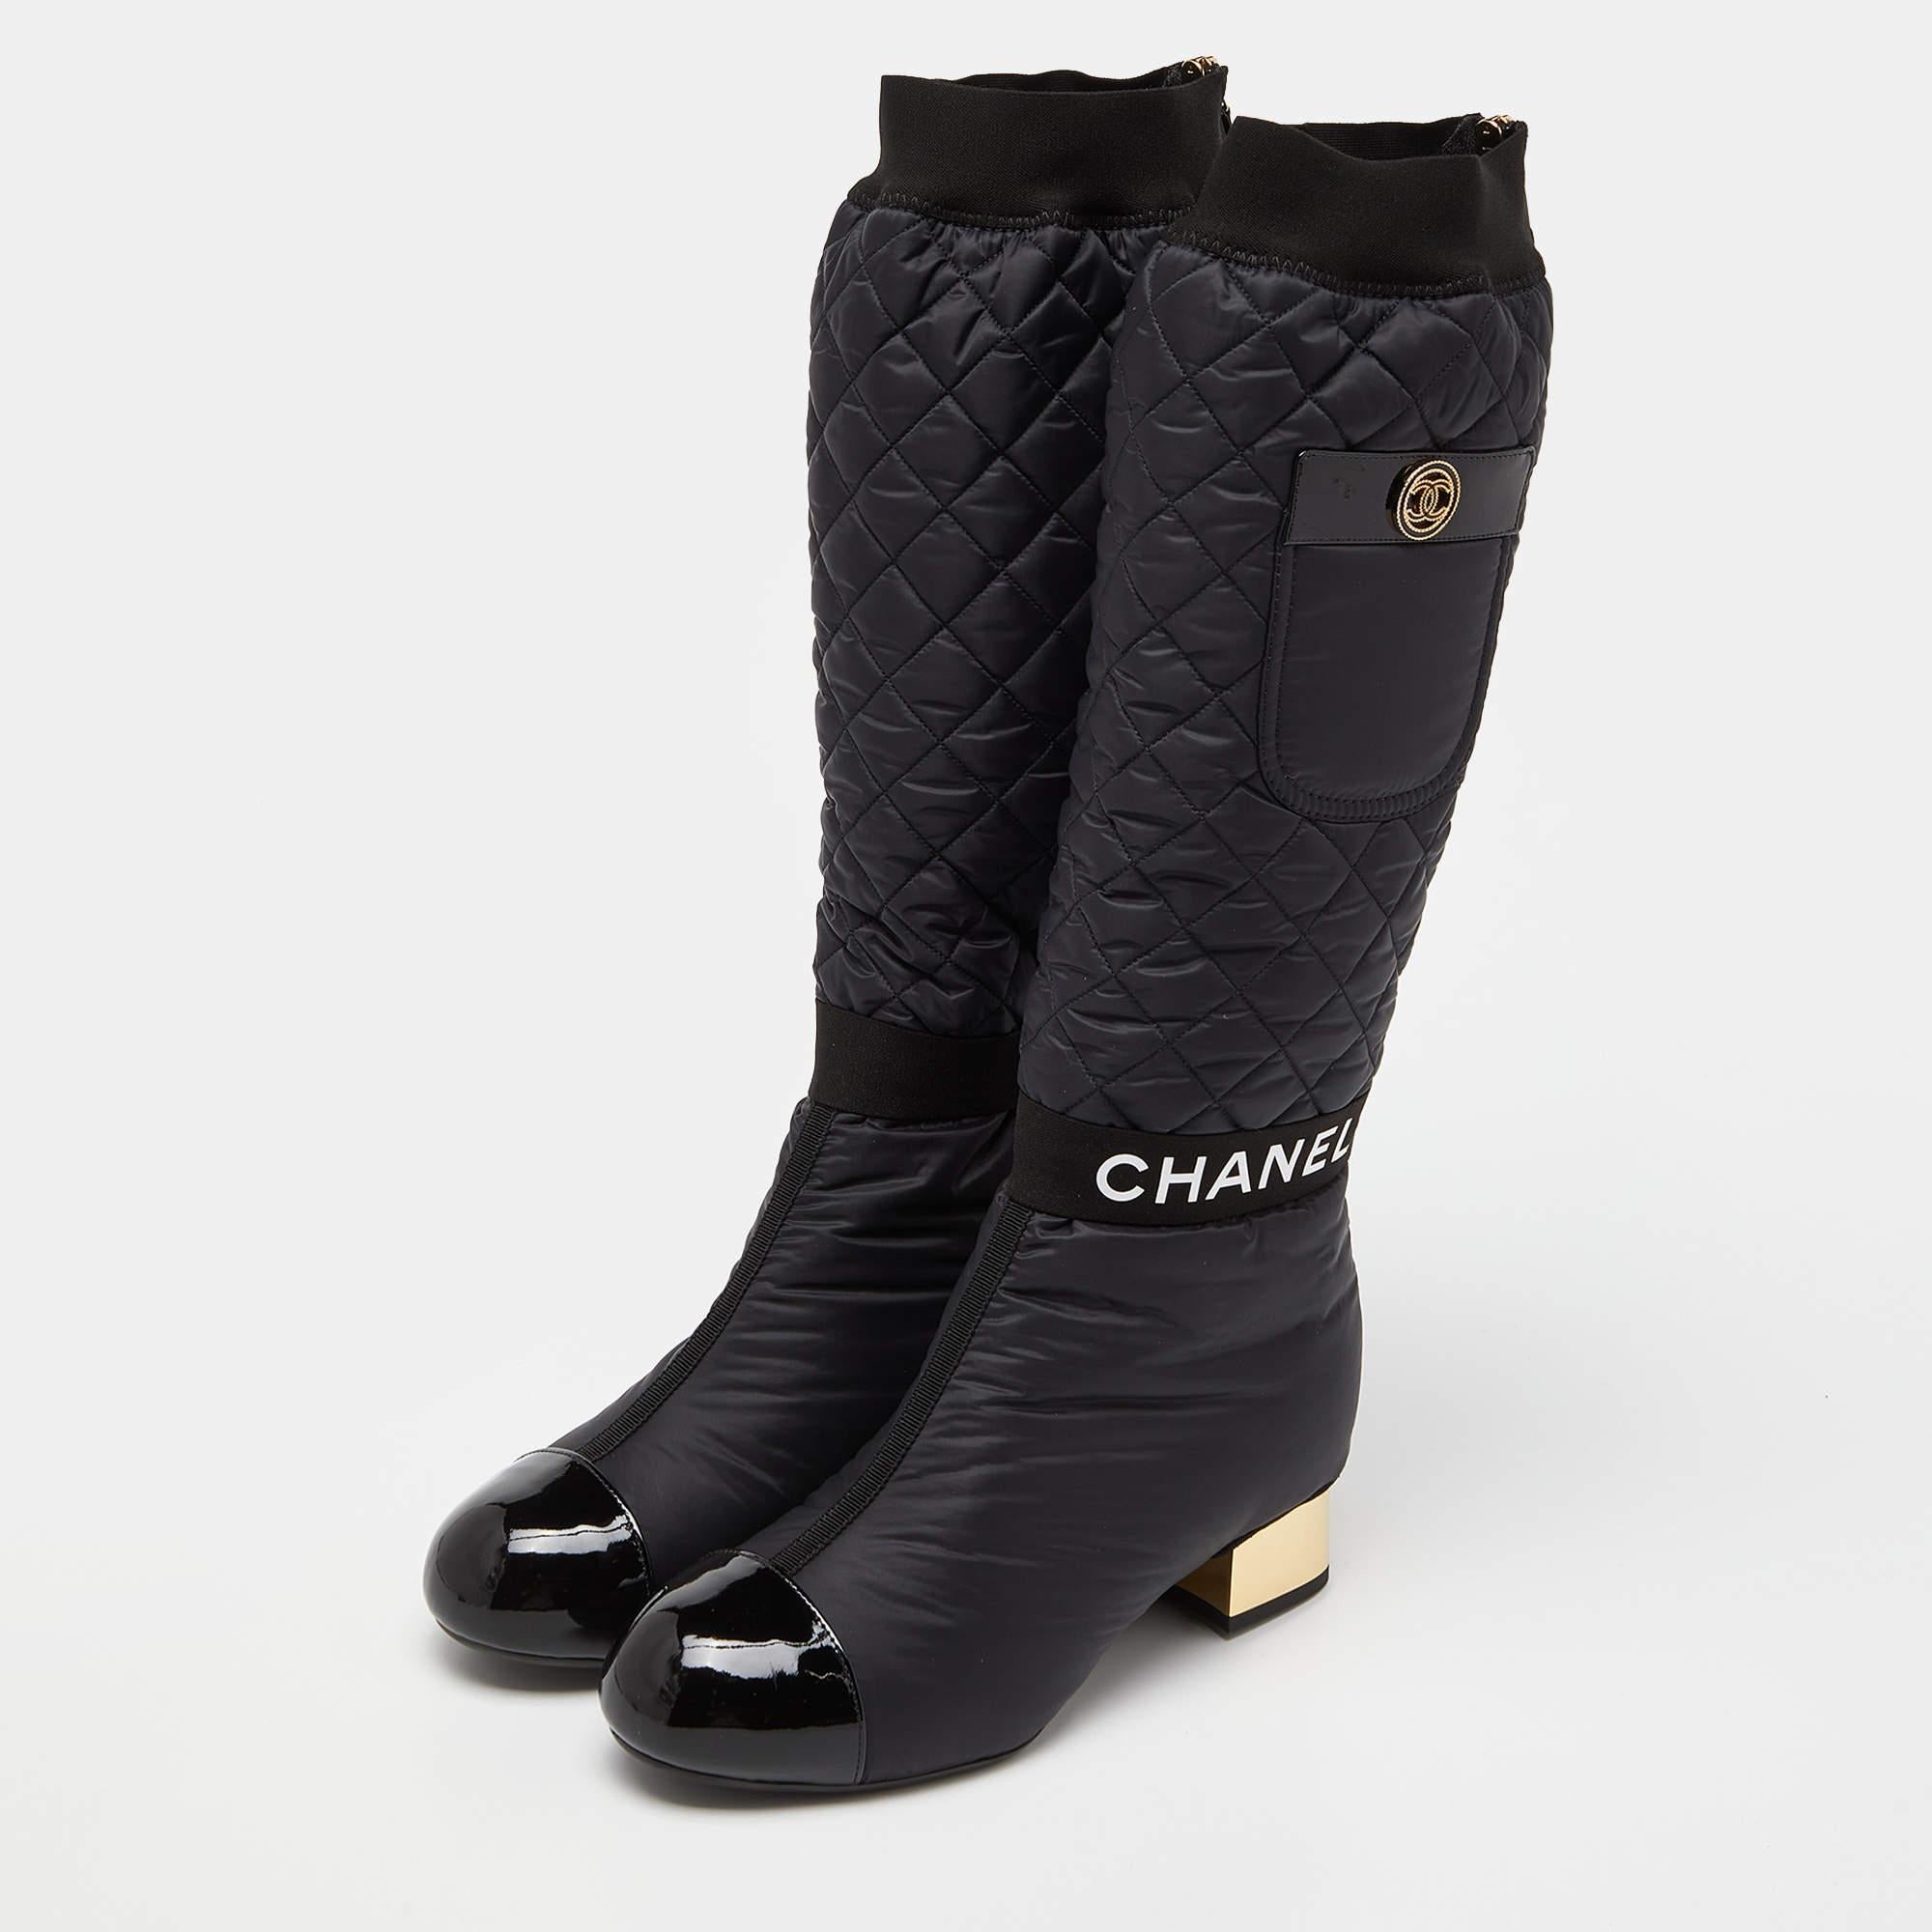 Enjoy the most fashionable days with these Chanel knee-high boots. Modern in design and craftsmanship, they are fashioned in nylon and patent leather with brand accents and gold-tone heels.

